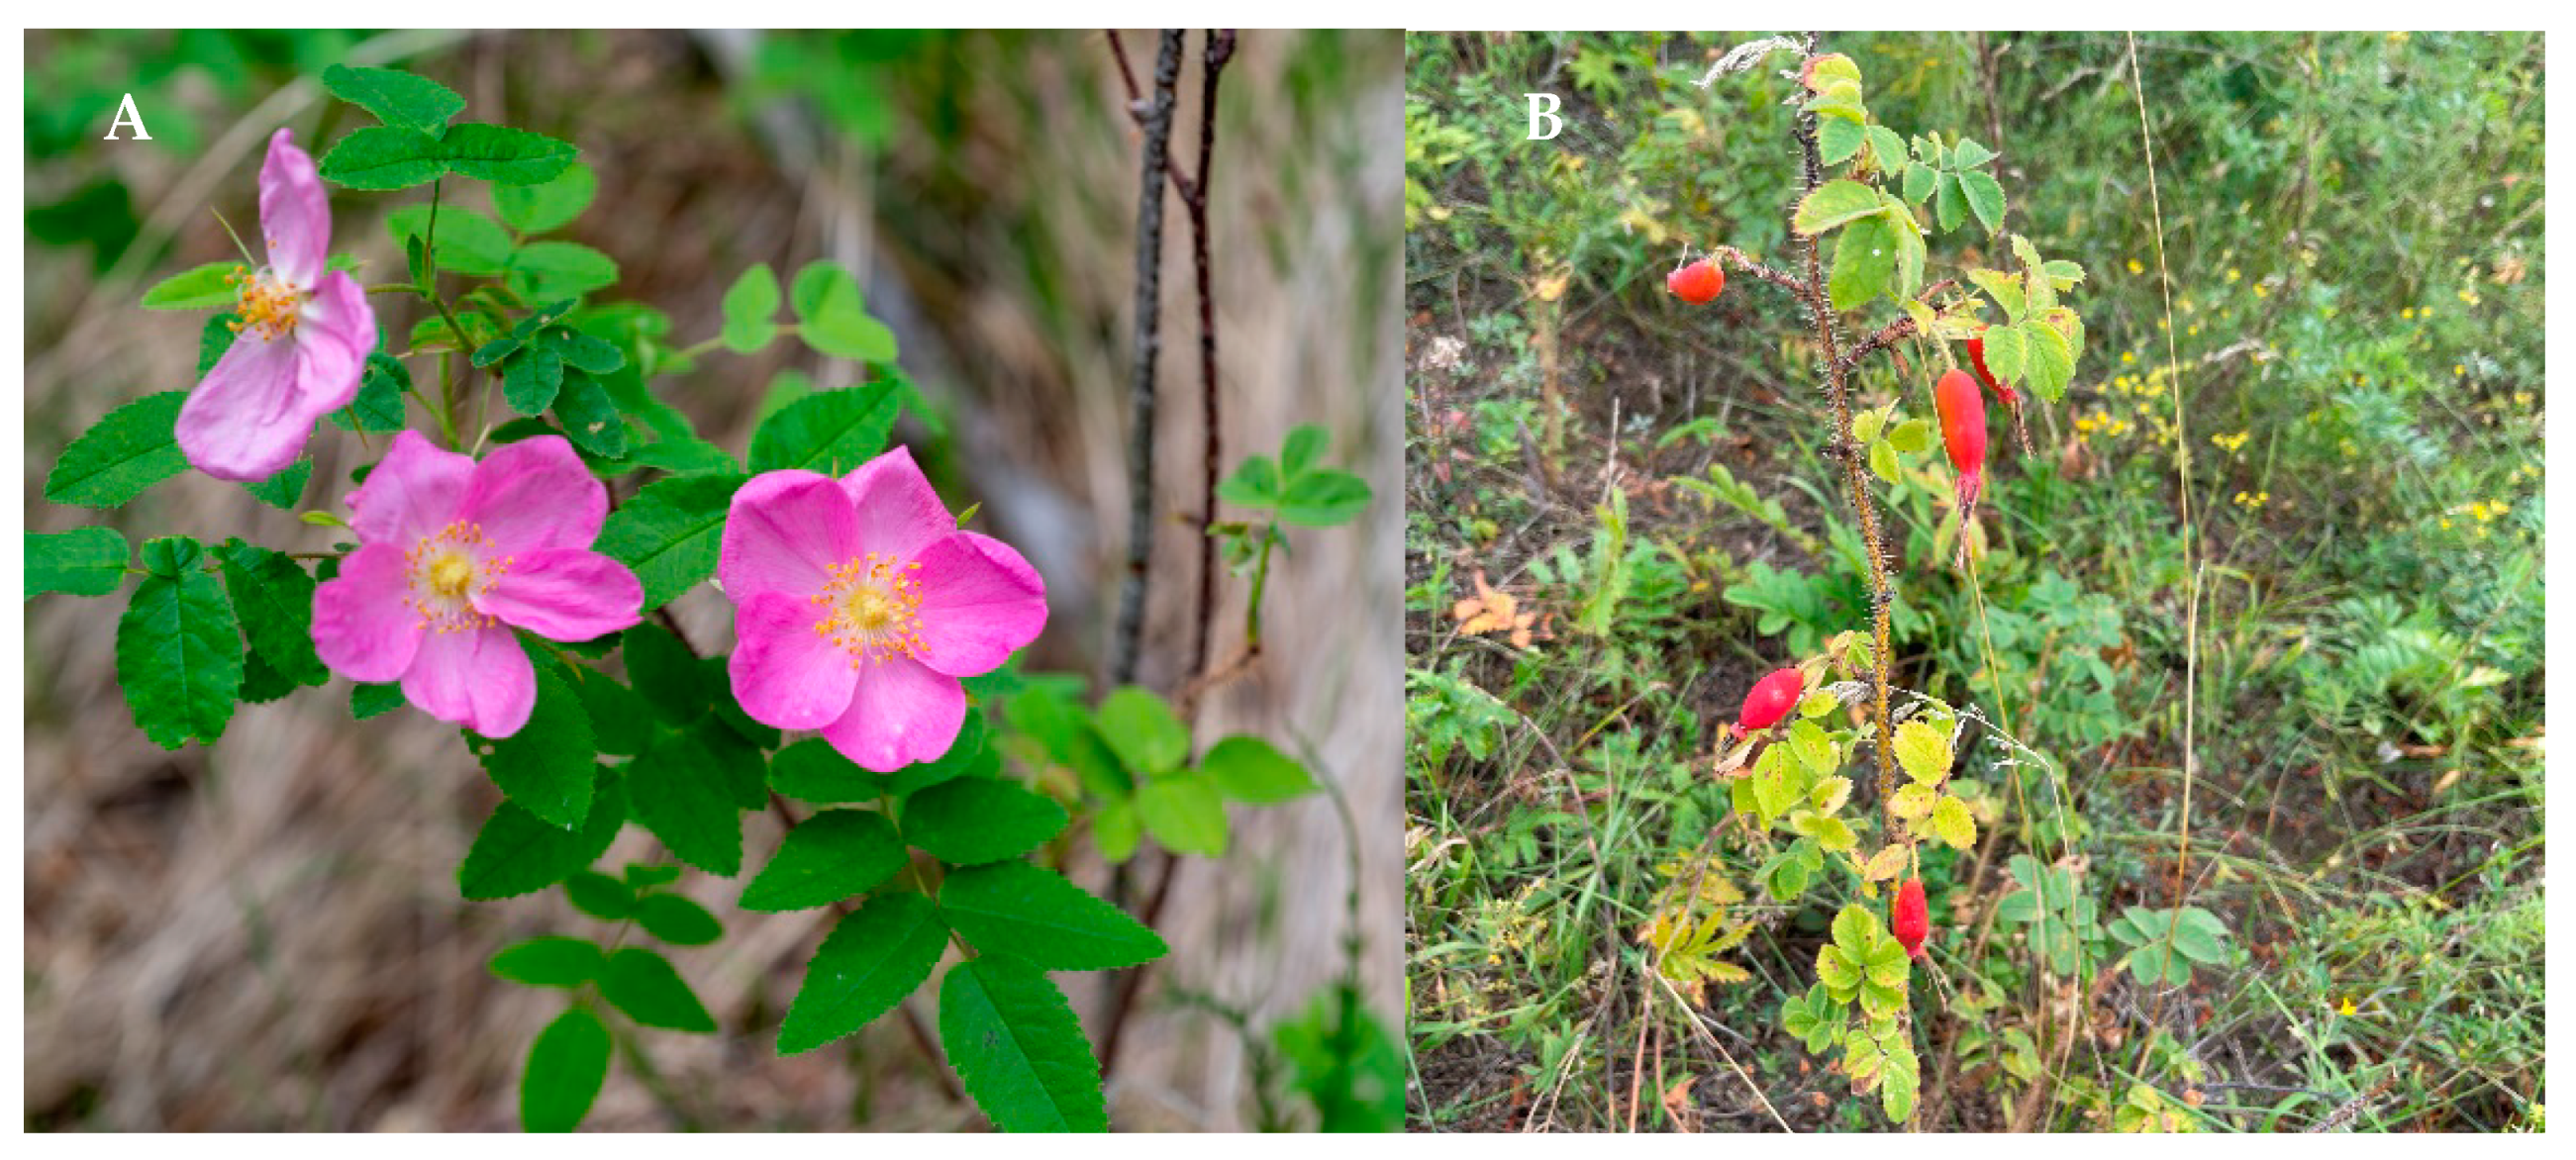 Plants | Free Full-Text | Metabolites of Prickly Rose: Chemodiversity and  Digestive-Enzyme-Inhibiting Potential of Rosa acicularis and the Main  Ellagitannin Rugosin D